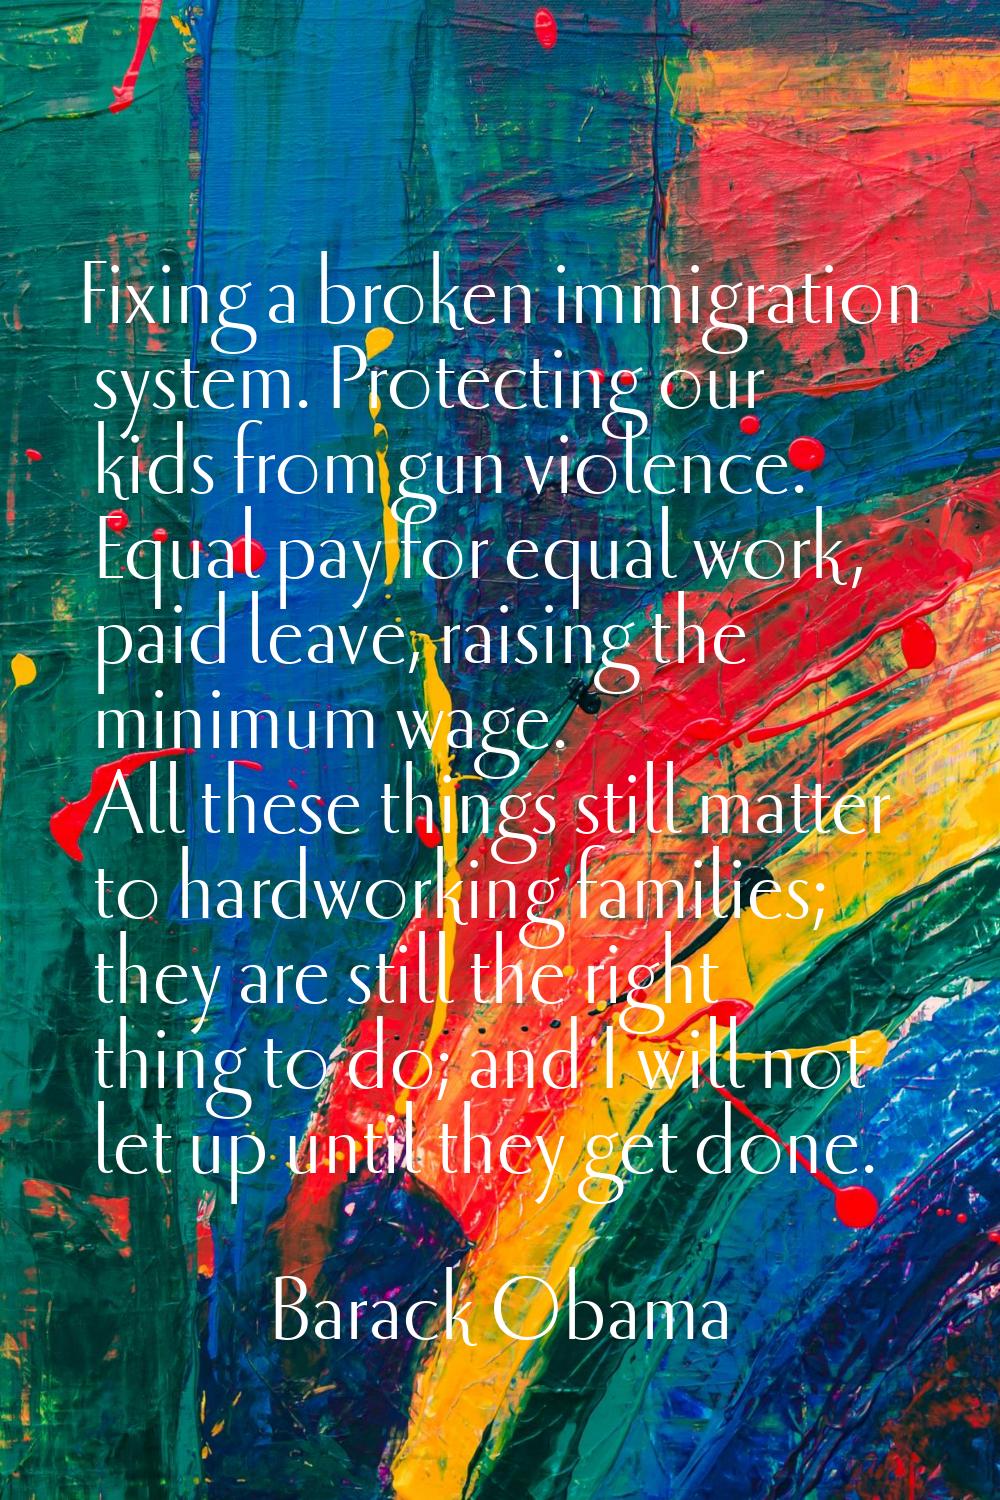 Fixing a broken immigration system. Protecting our kids from gun violence. Equal pay for equal work